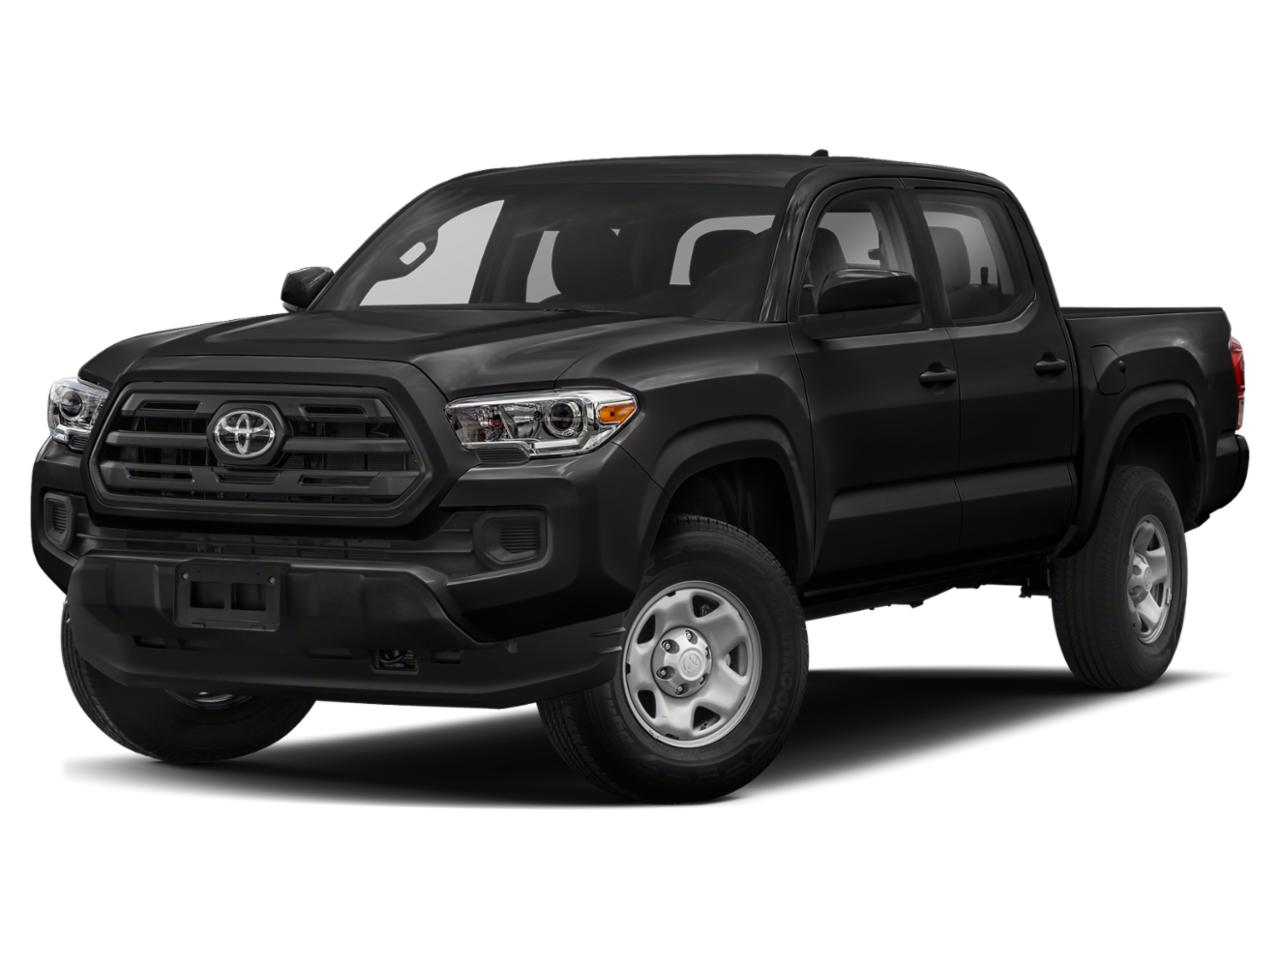 2019 Toyota Tacoma 2WD Vehicle Photo in RIVERSIDE, CA 92504-4106